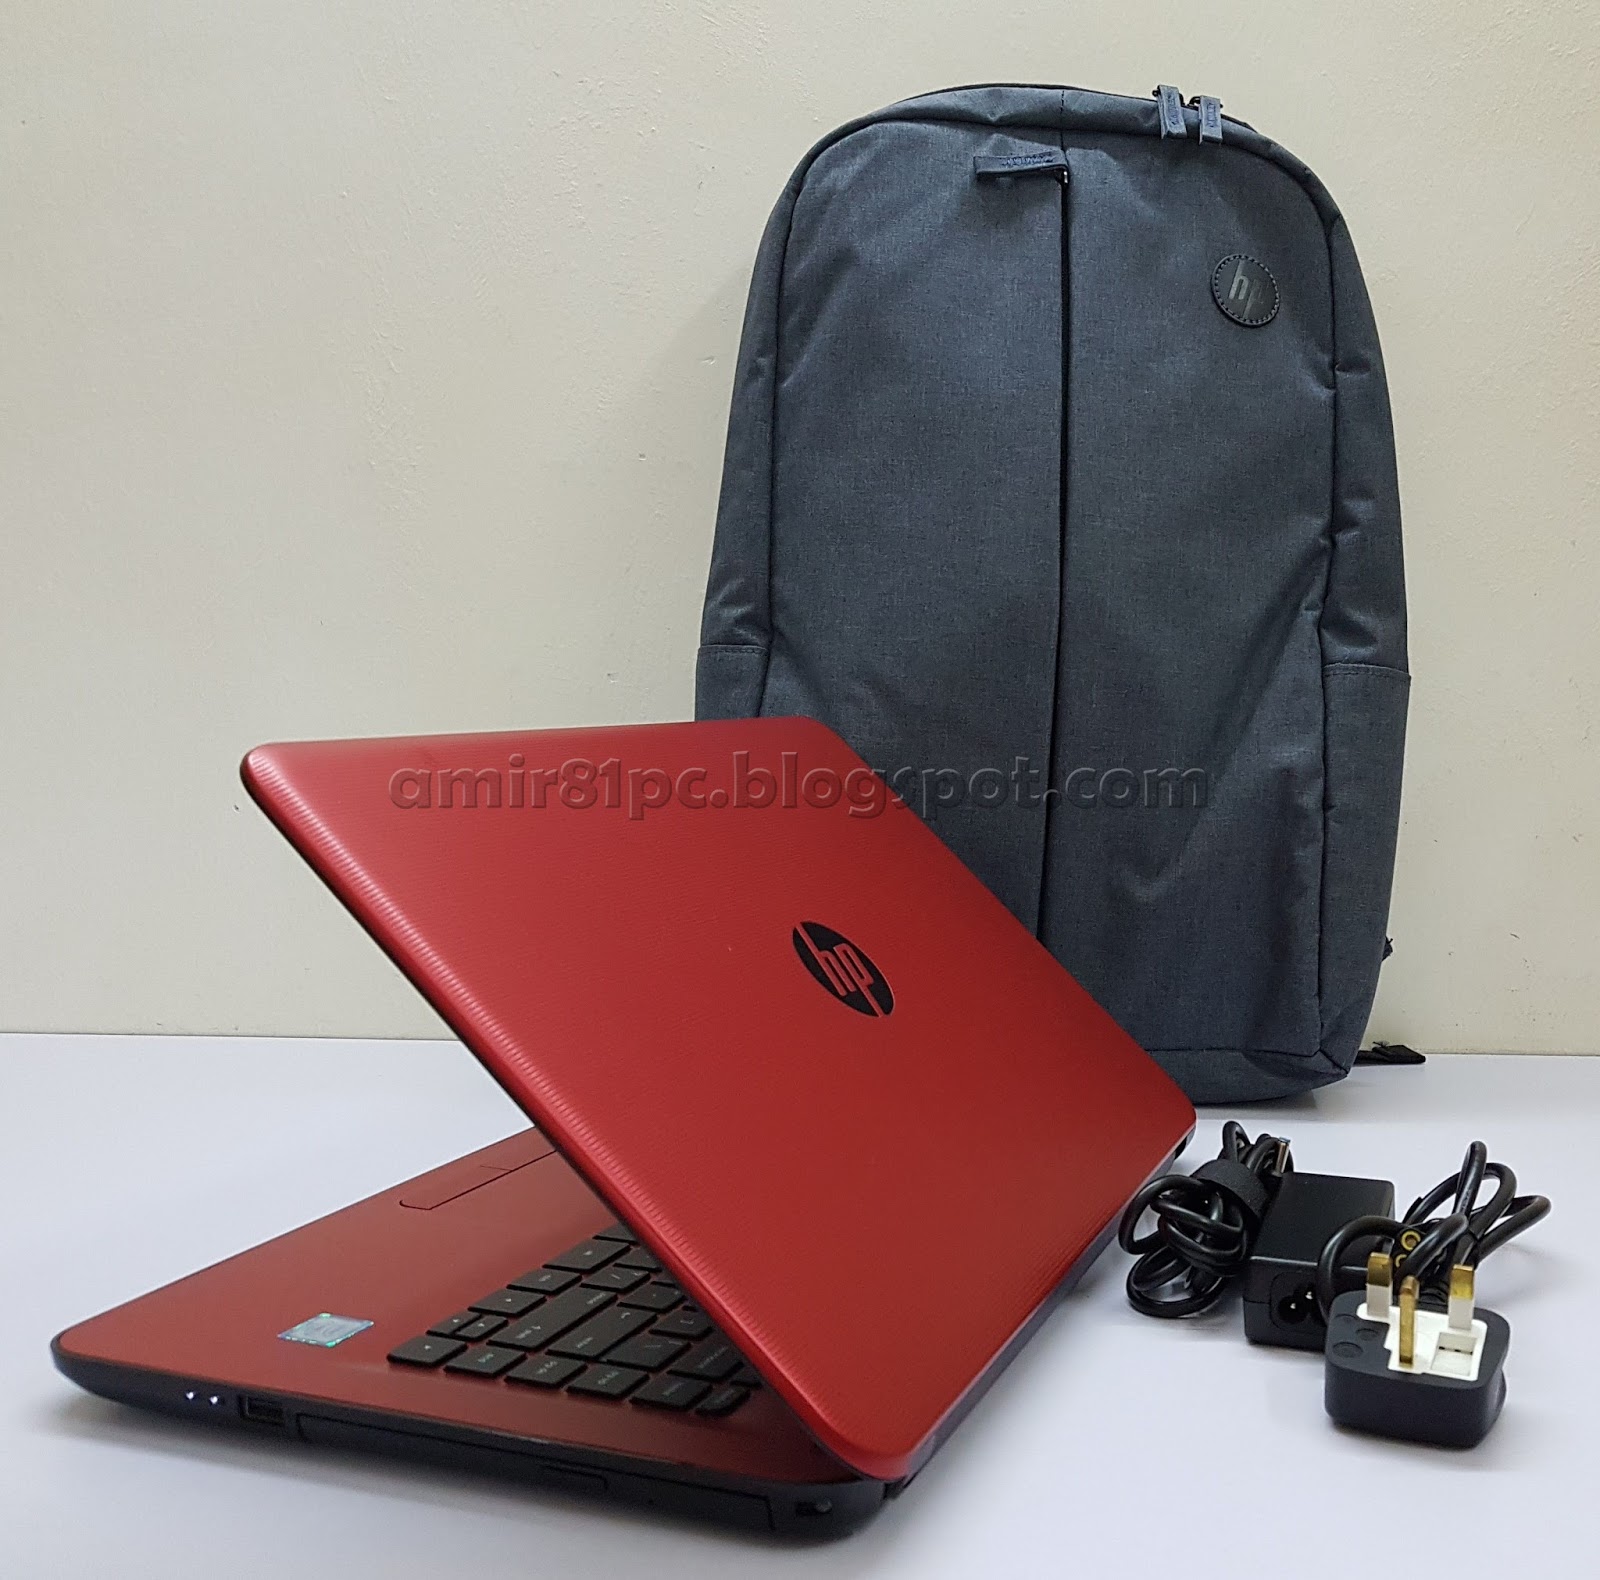 Three A Tech Computer Sales and Services: Used Laptop HP ...